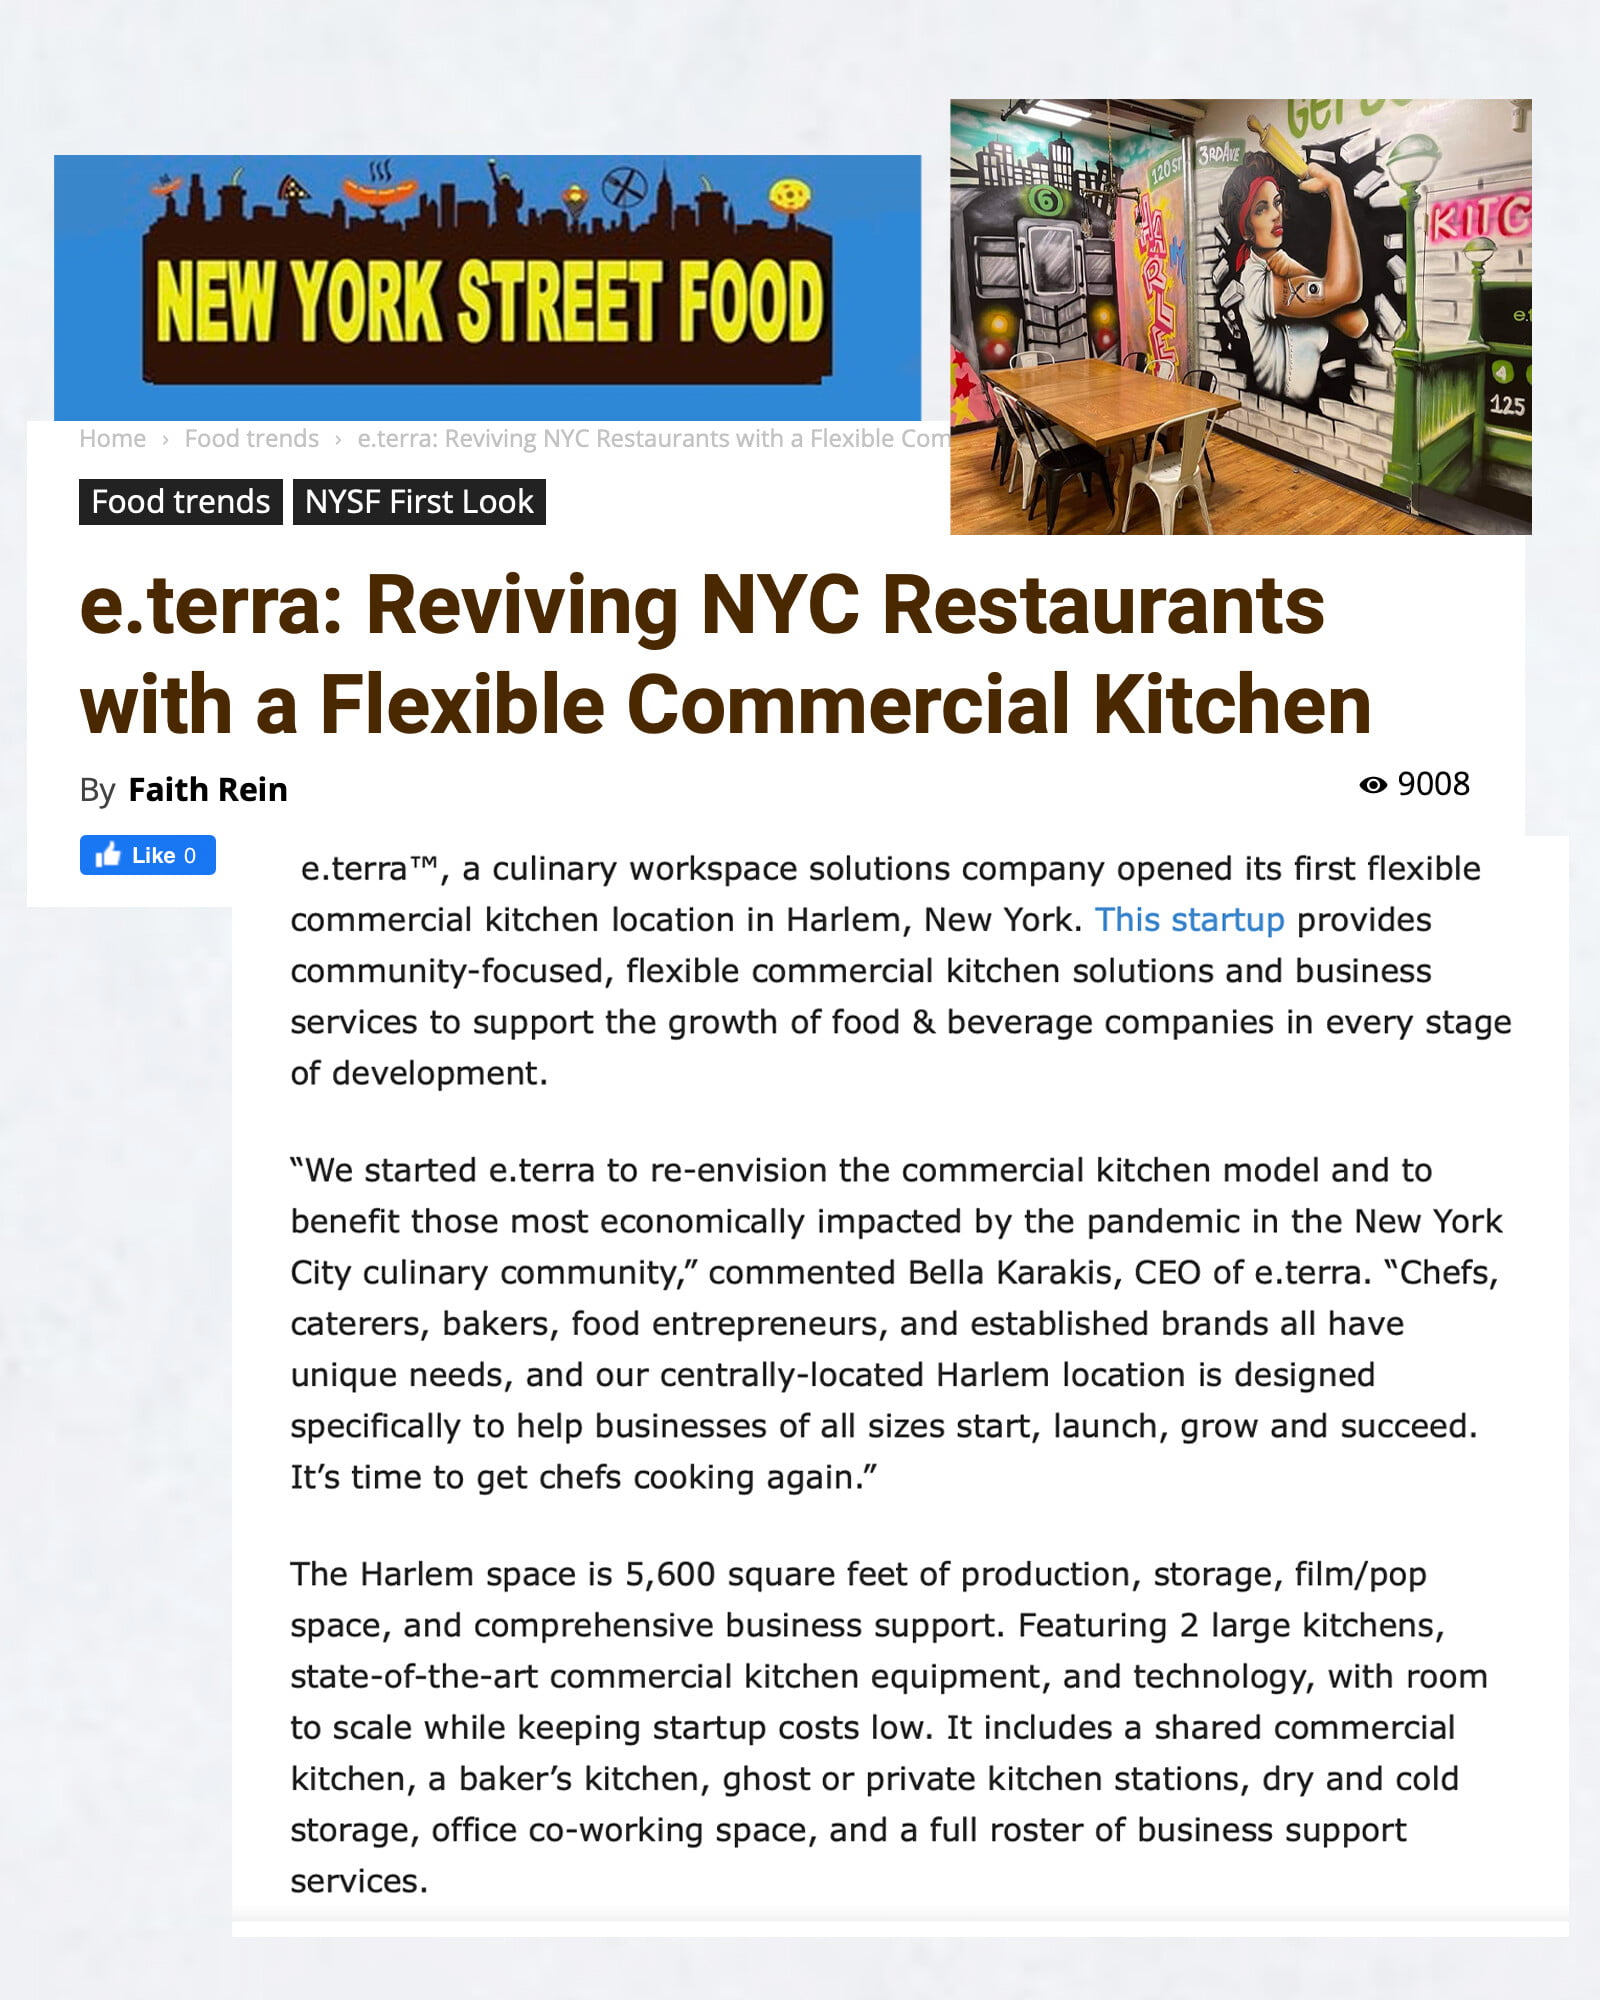 Press screen shot about e.terra from NY Street Food